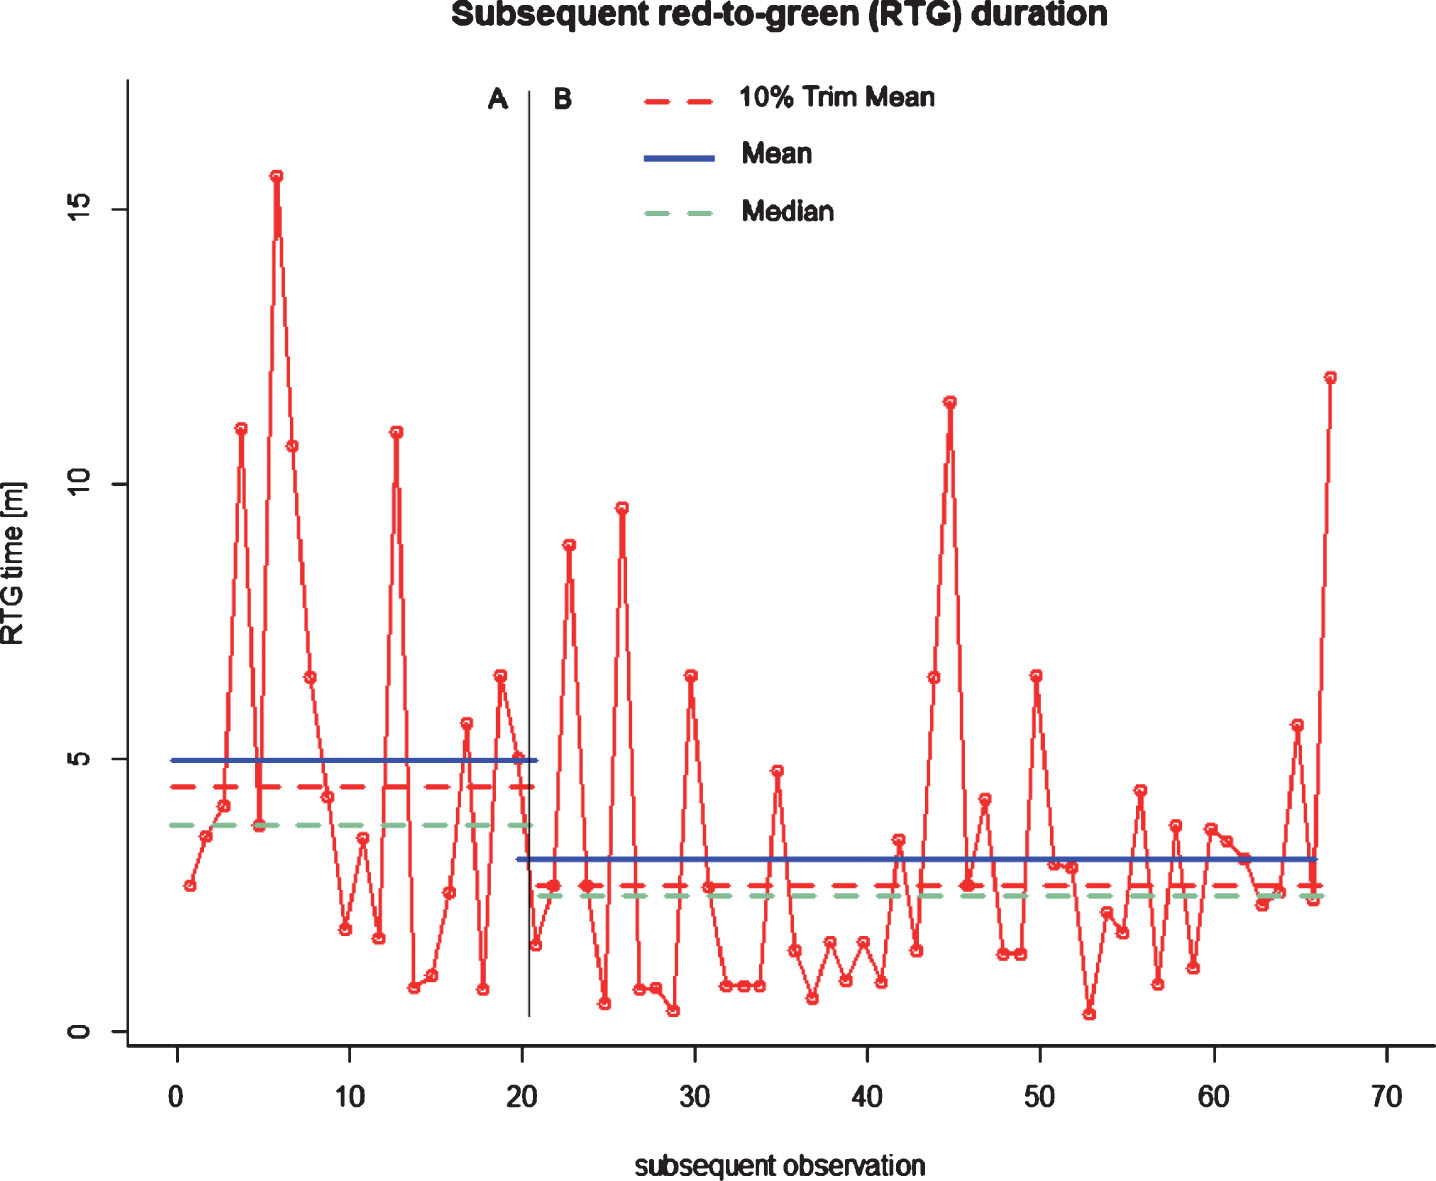 Subsequent RTG durations [min] in phases A (TDD) and B (CTDD) – Experiment 2, Developer 1.